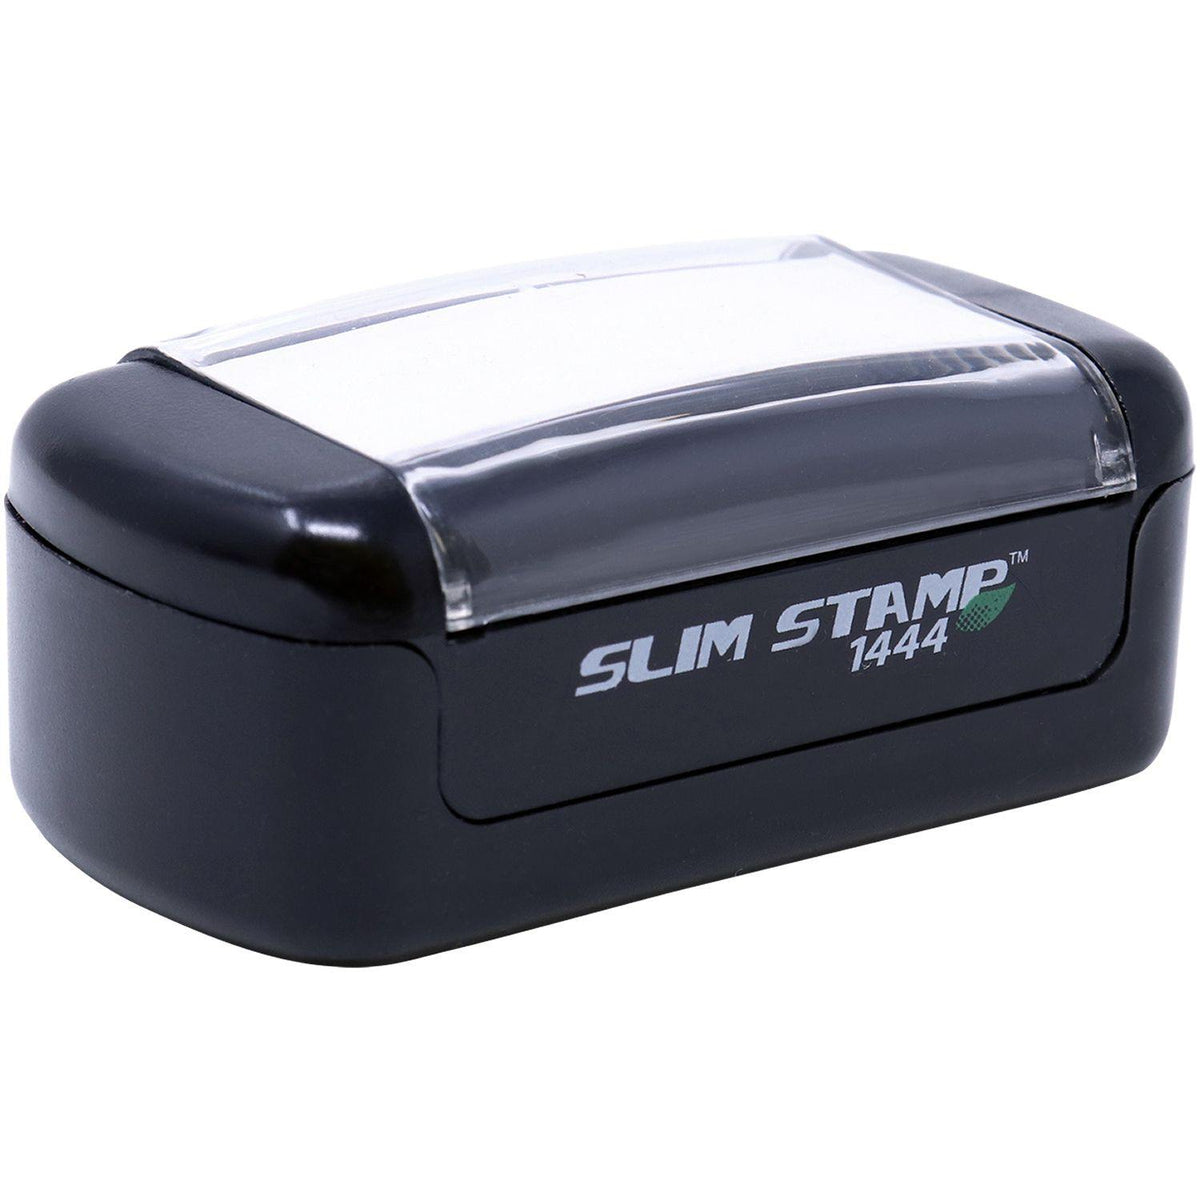 Alt View of Slim Pre-Inked Great Stamp Mount Angle